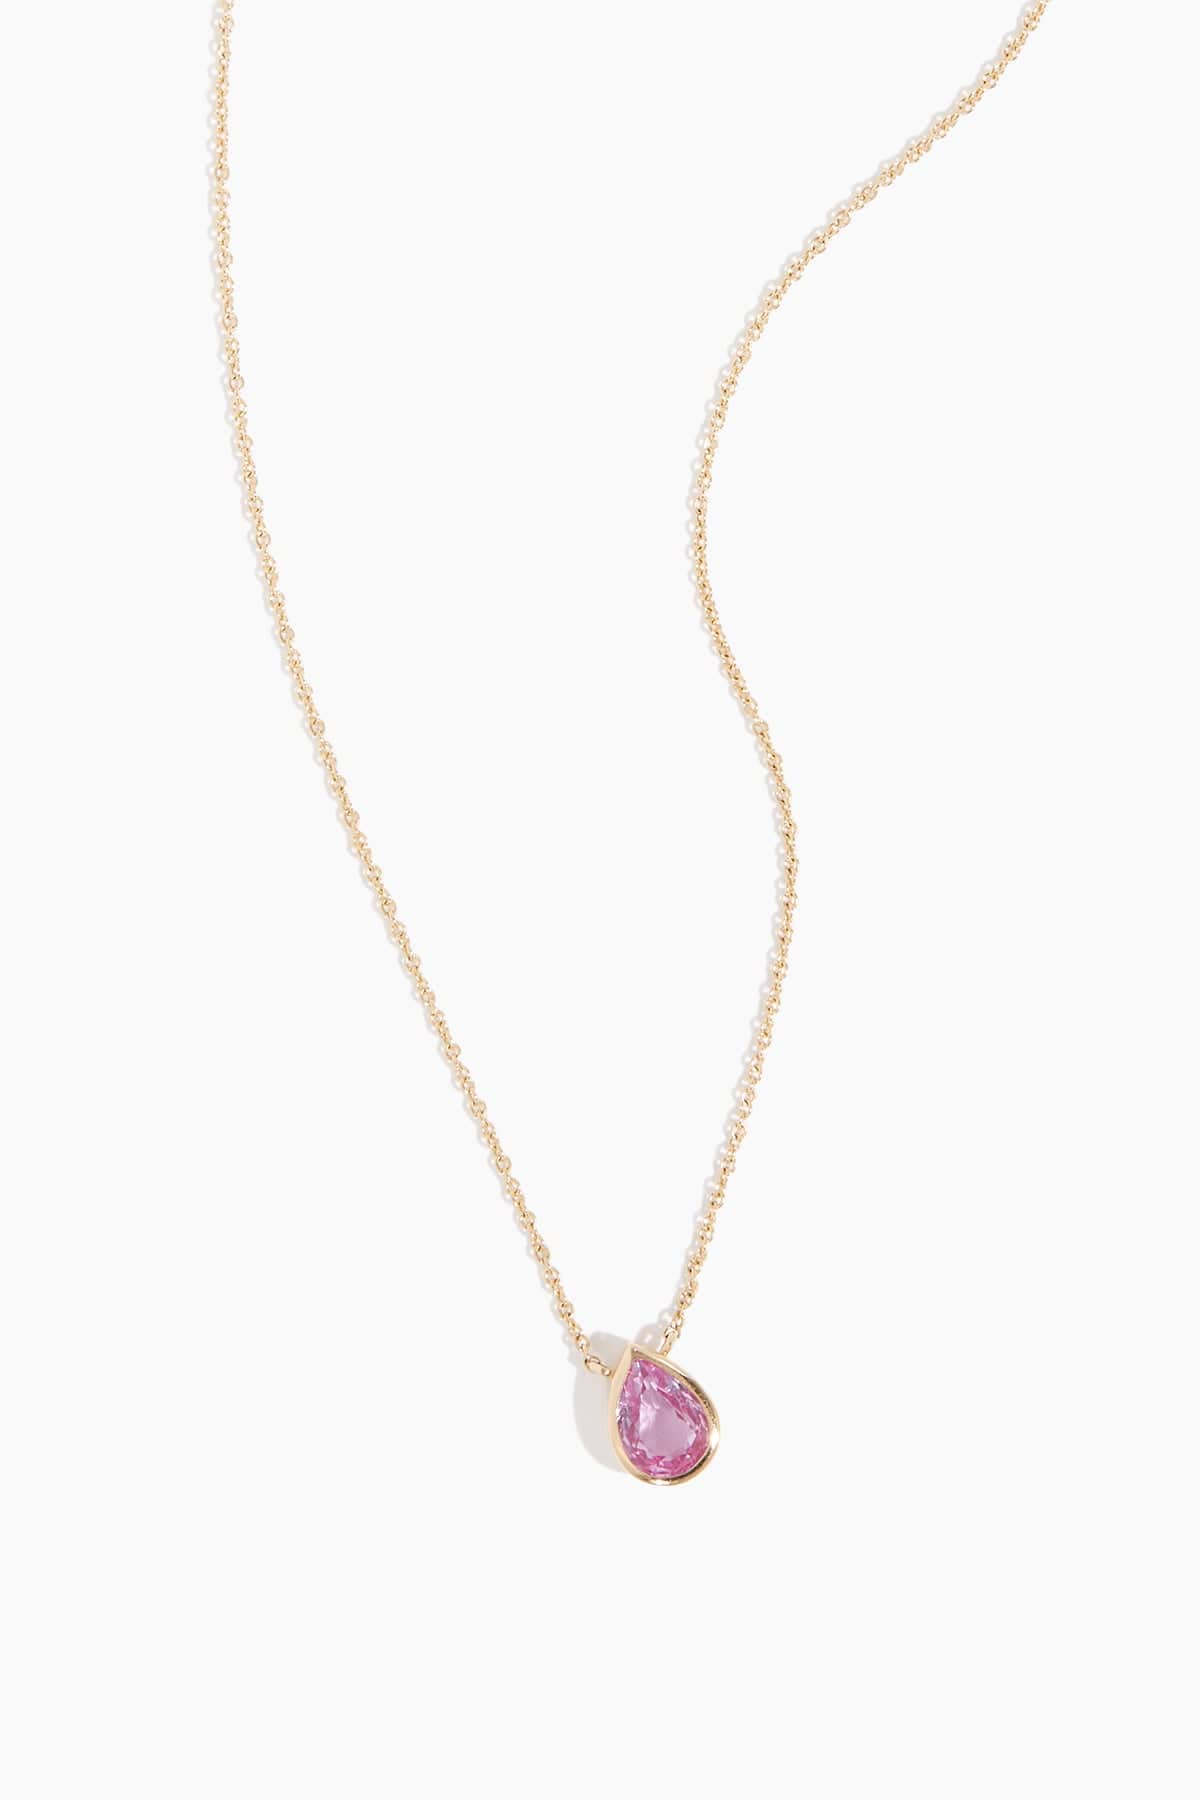 Vintage La Rose Necklaces Pink Sapphire Pear Bezel Necklace in 14K Yellow Gold